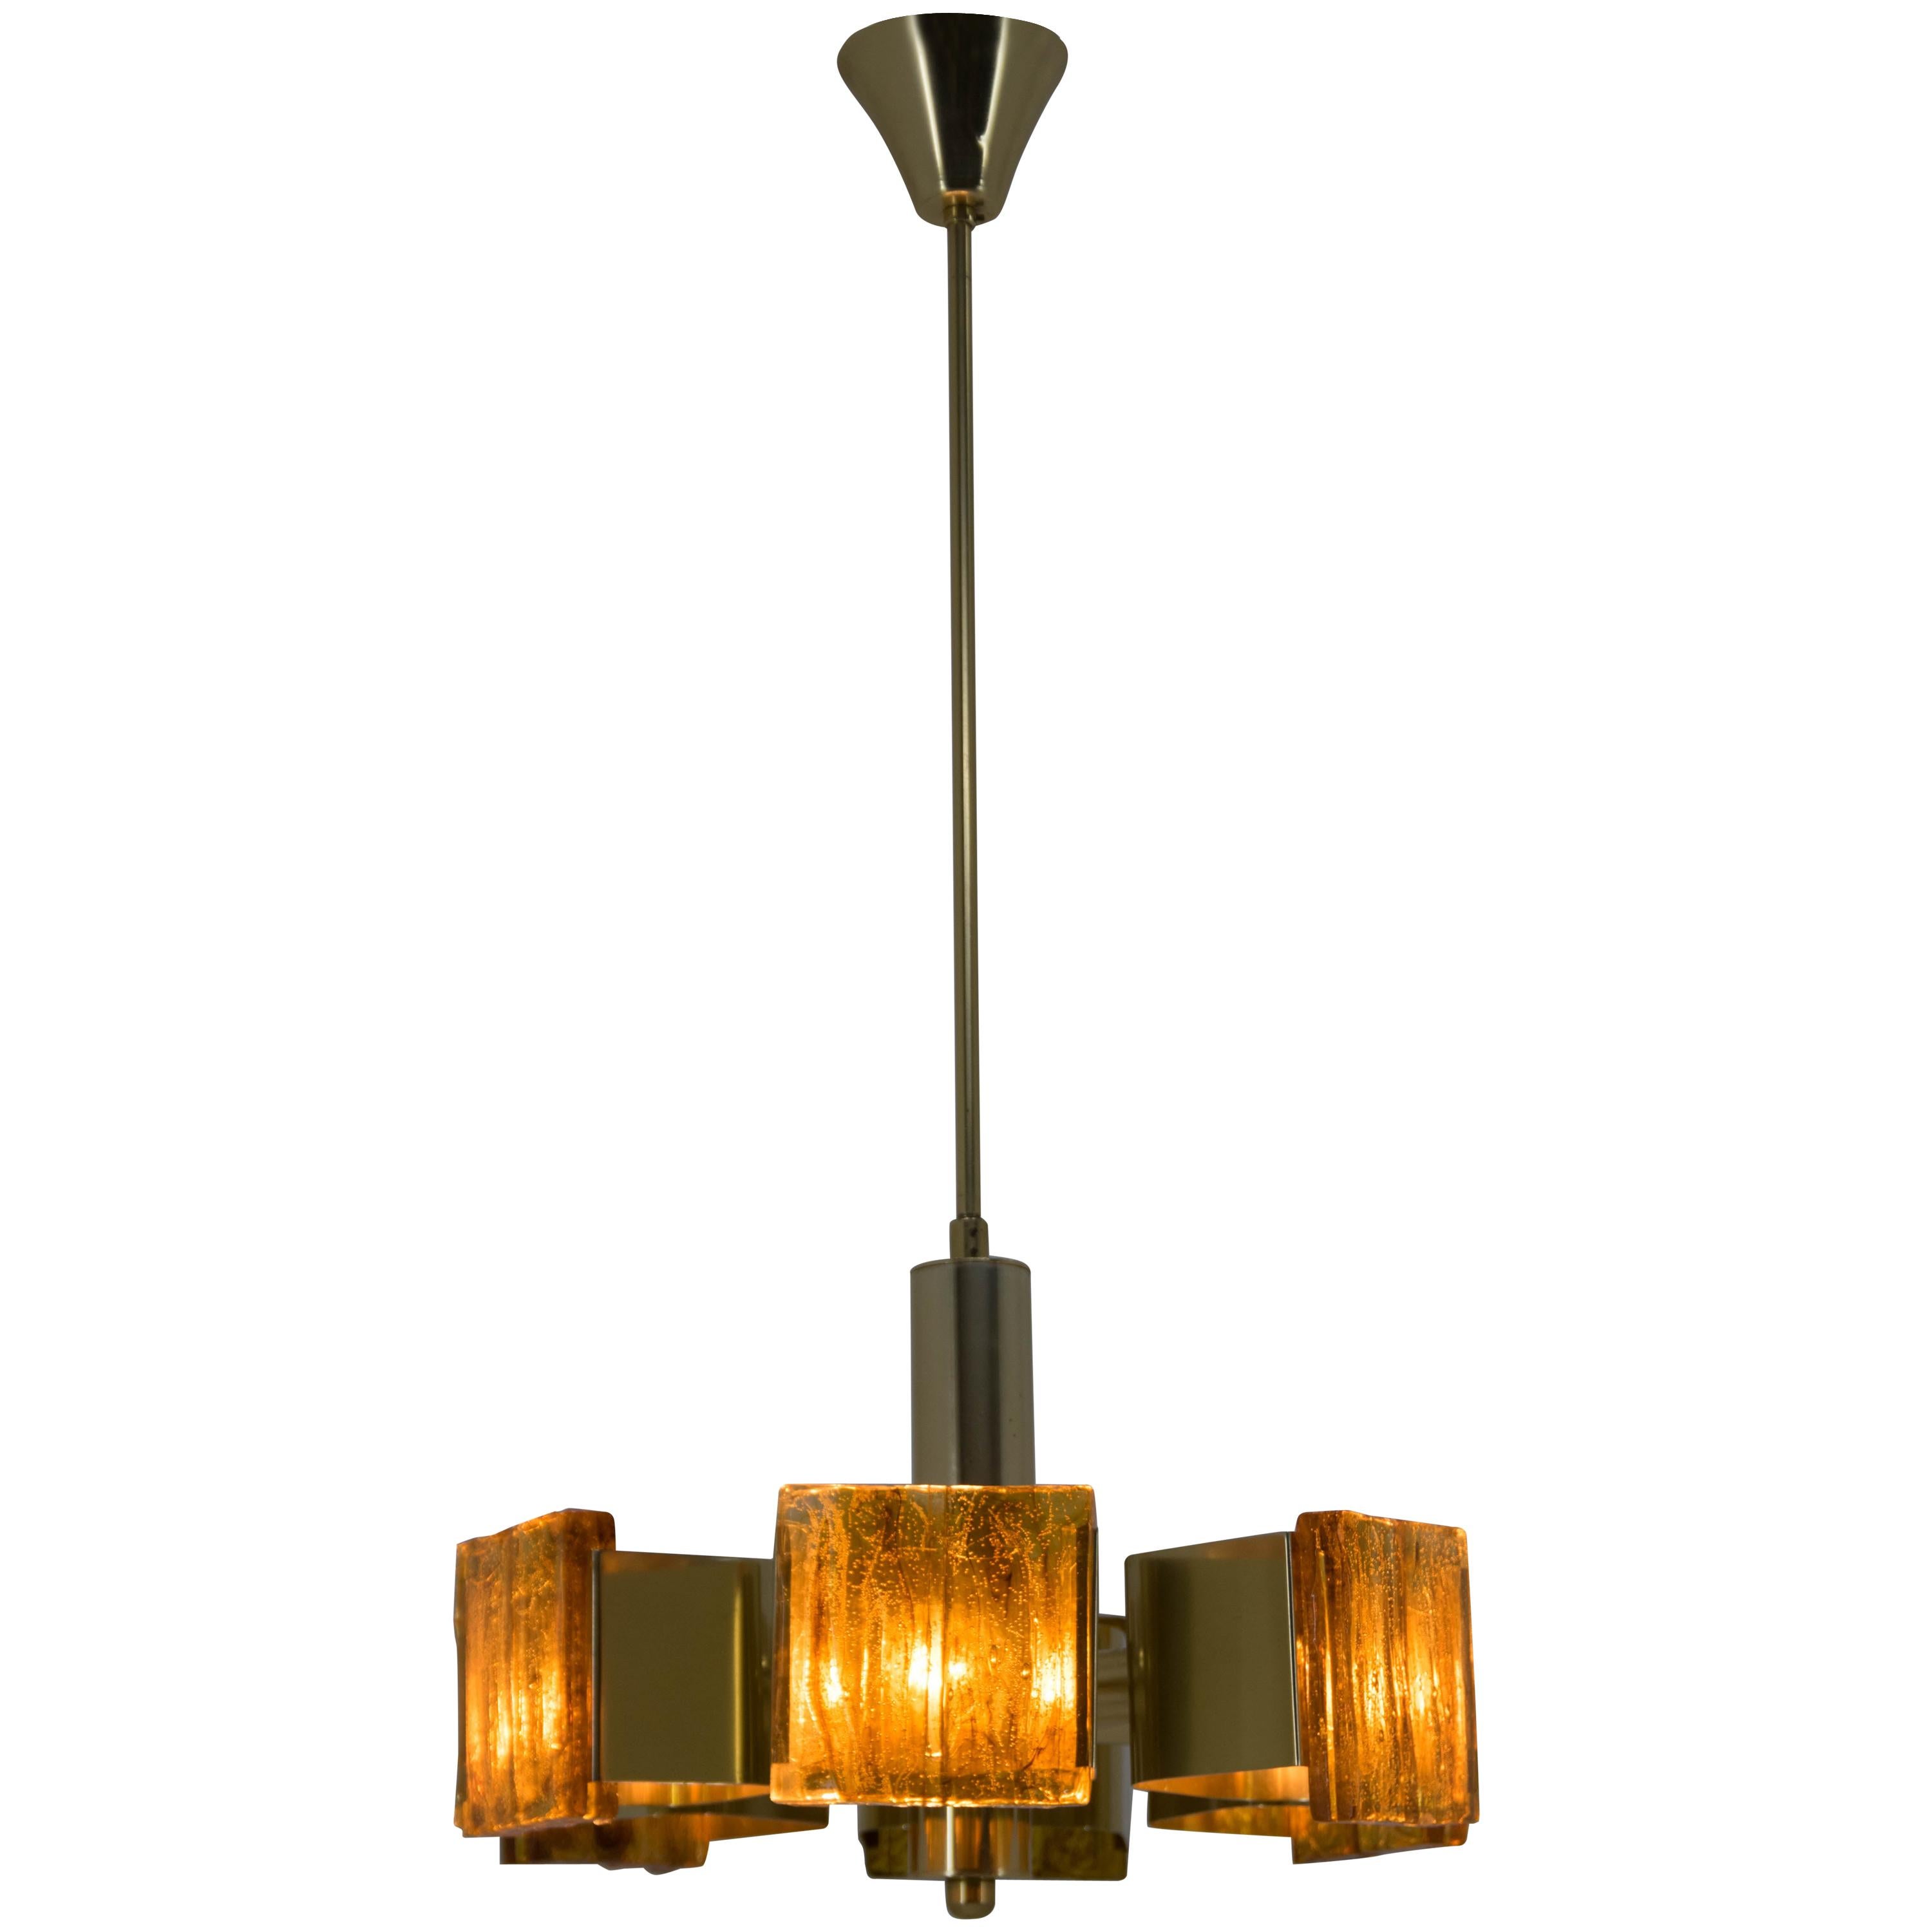 Midcentury Brass and Resin Chandelier, Hungary, 1970s